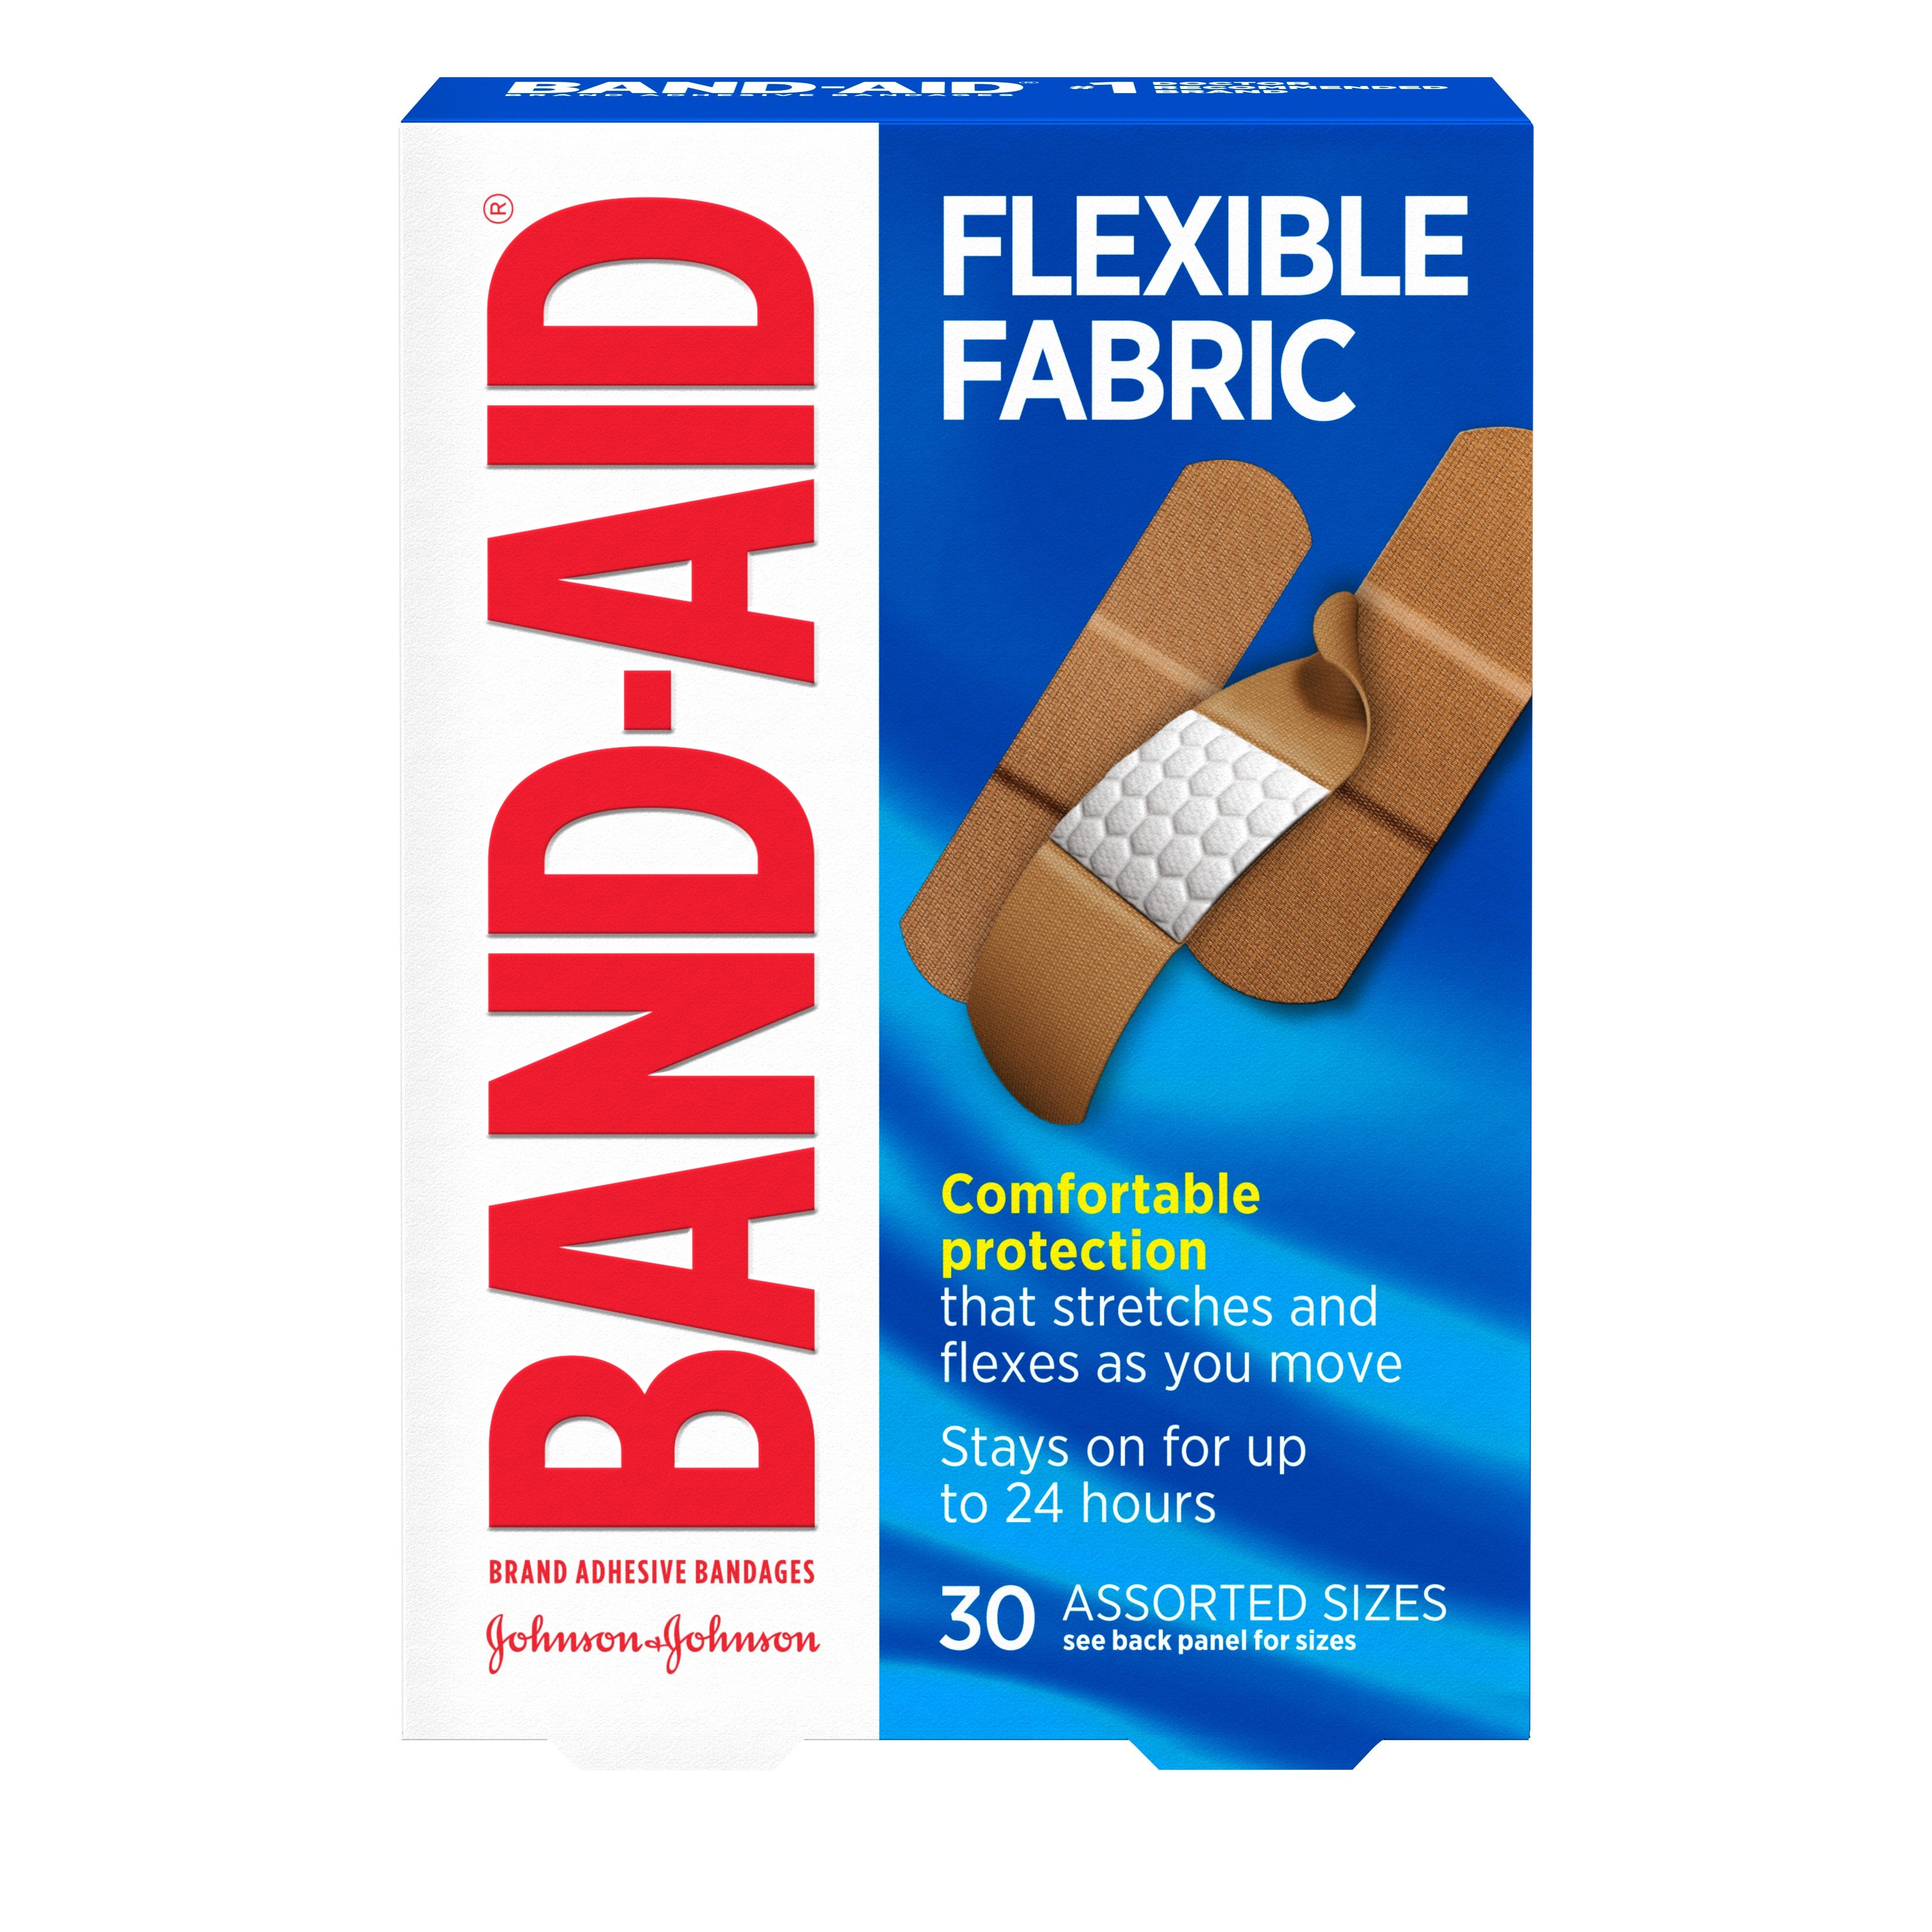 Band-Aid Brand Adhesive Bandages Flexible Fabric, Assorted 100